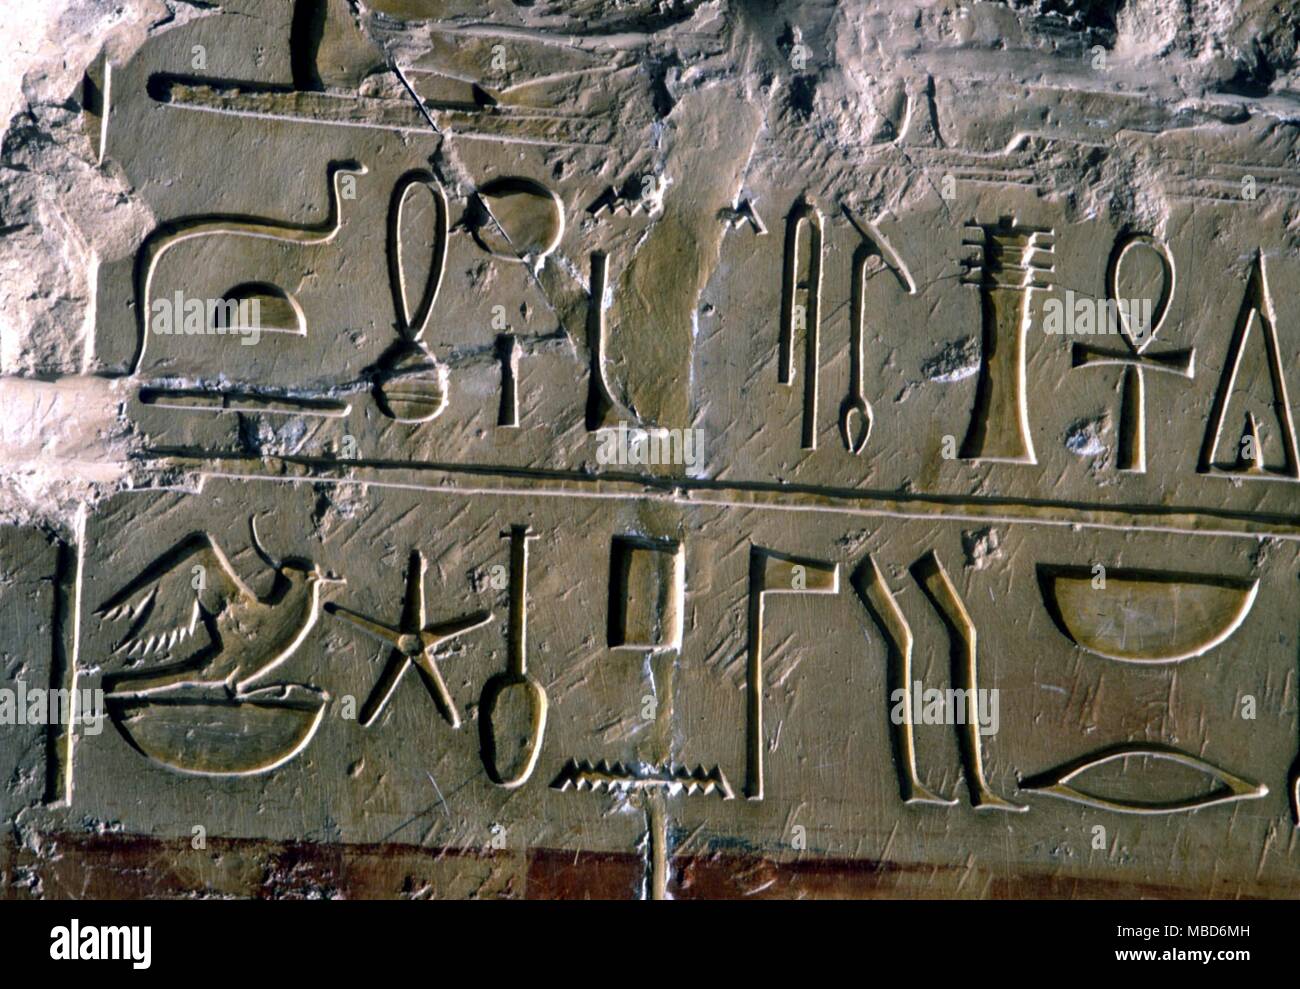 SYMBOLS - HIEROGLYPHICS - Details of hieroglyphics, or sacred writings on the wall of the funerary temple of Hapshepsut, Thebes Stock Photo